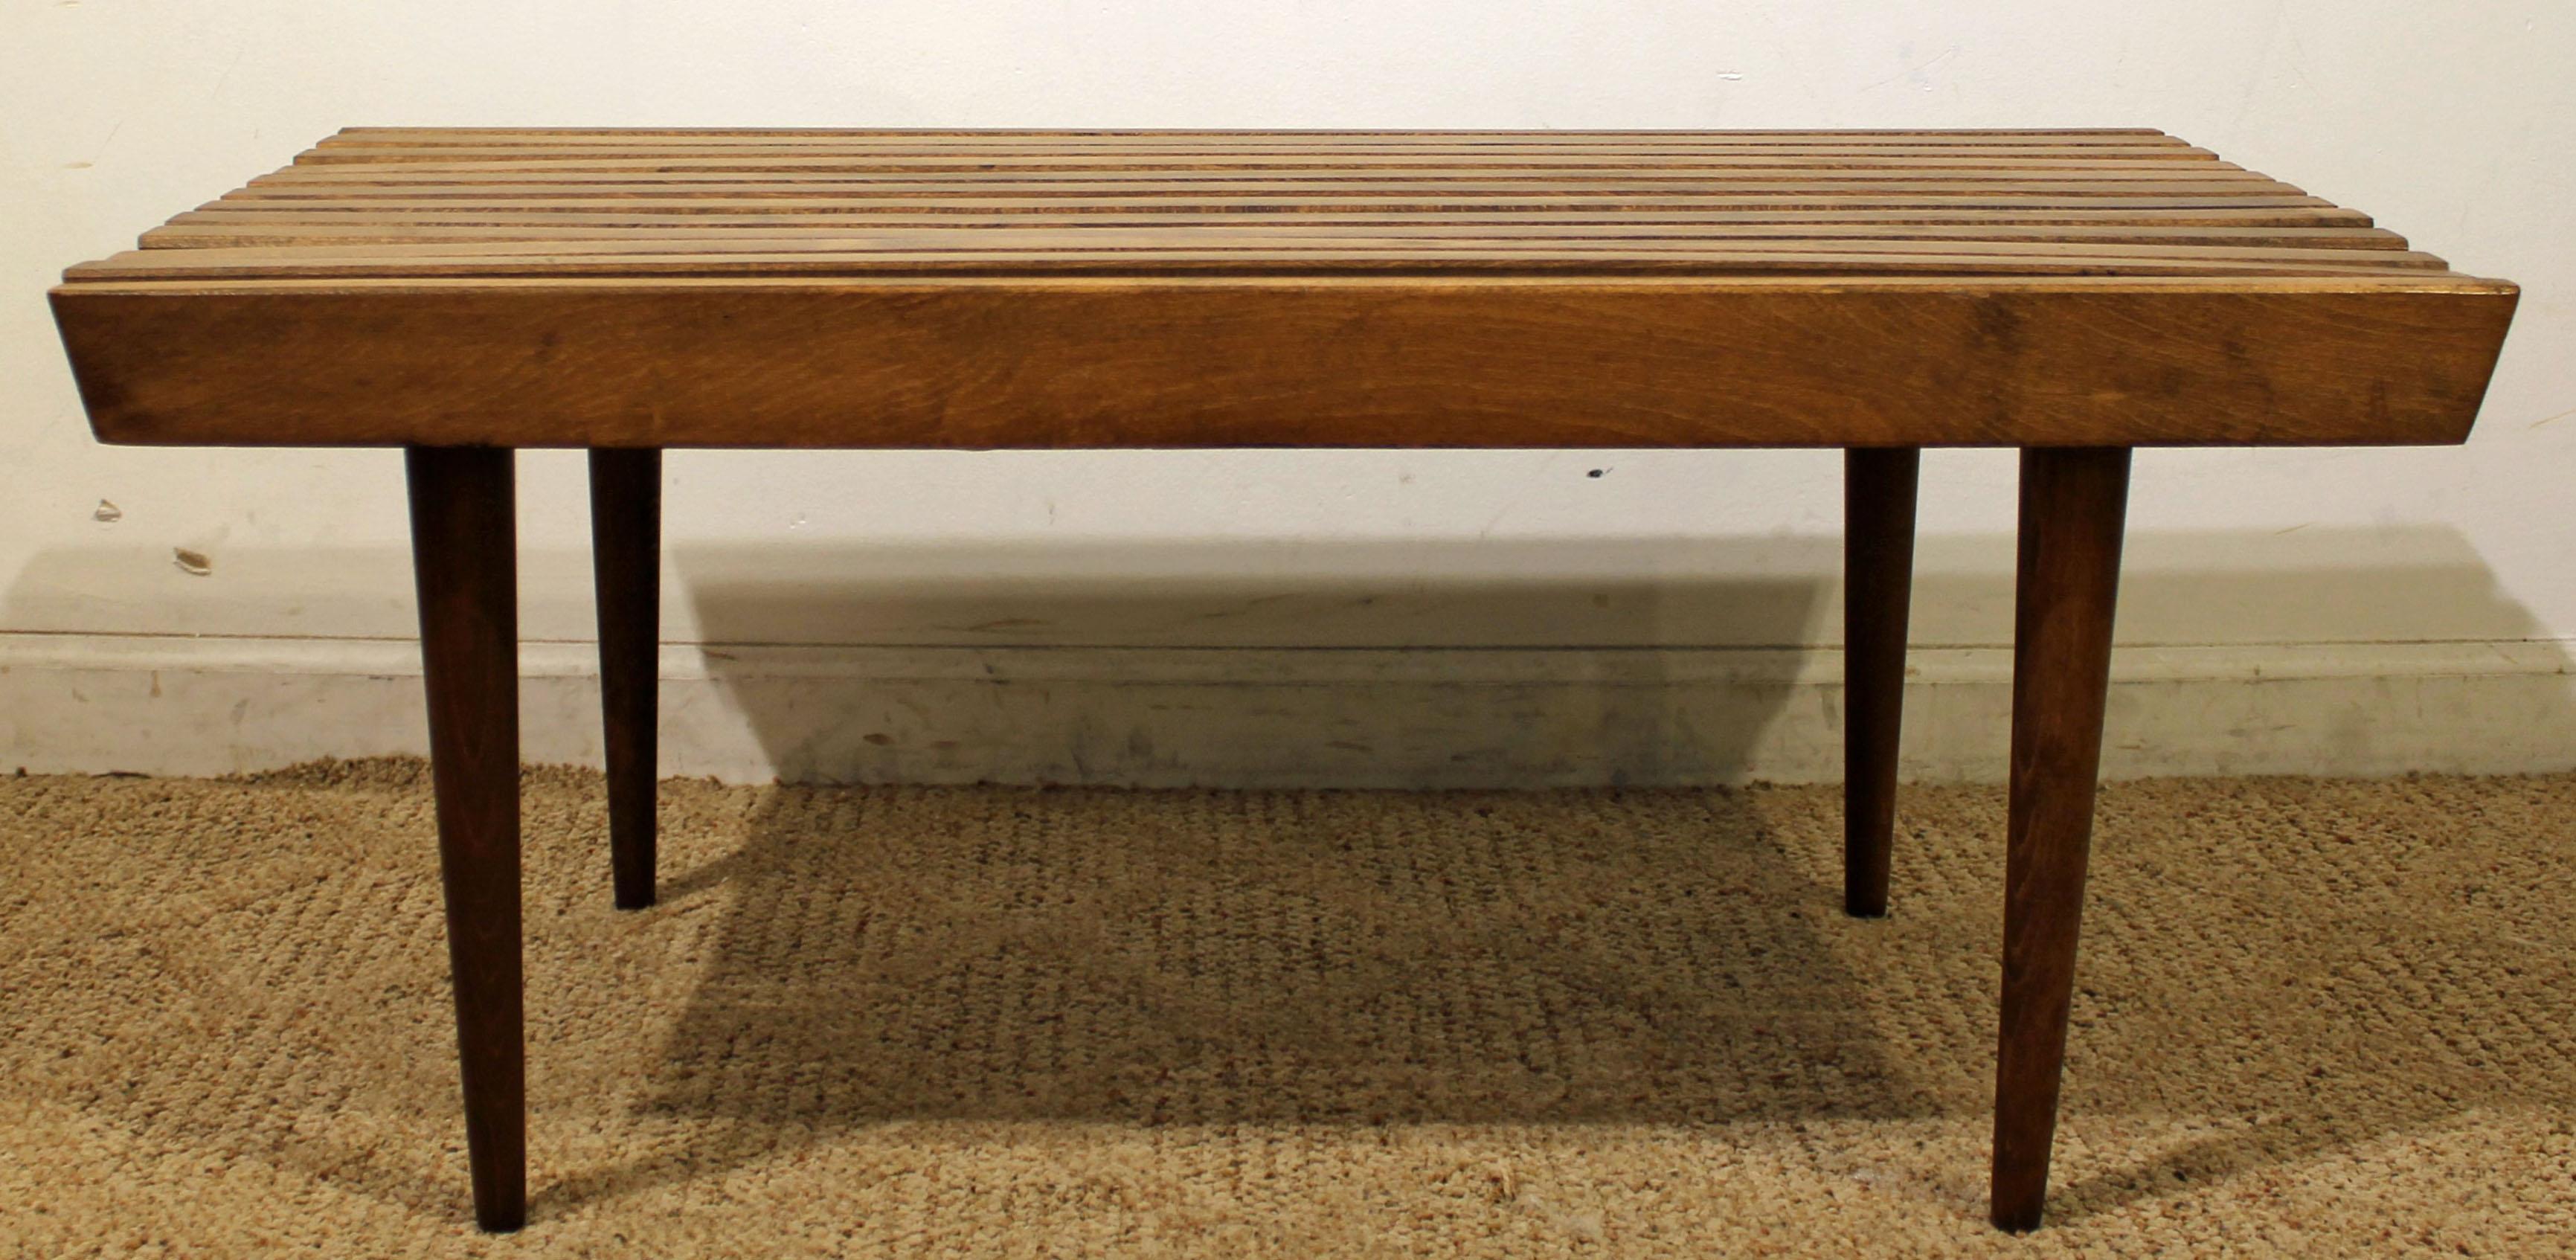 What a find. Offered is a midcentury slat bench coffee table. This table is made of walnut. It is in great condition considering its age, but nothing overly noticeable. It is not signed. 

Dimensions: 
36